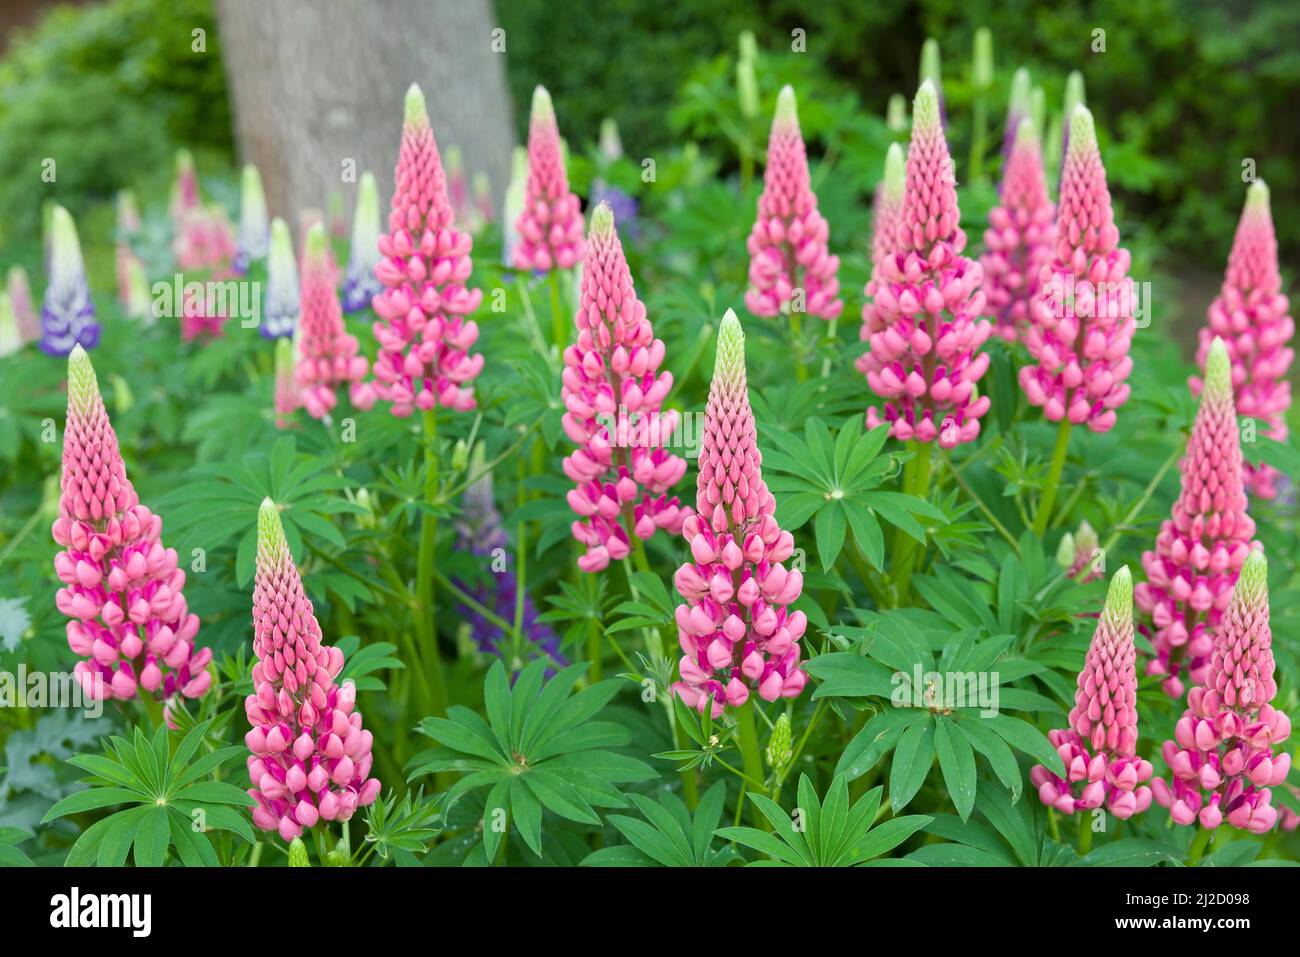 Pink lupin flowers, lupinus plants growing in an English garden in spring, UK Stock Photo